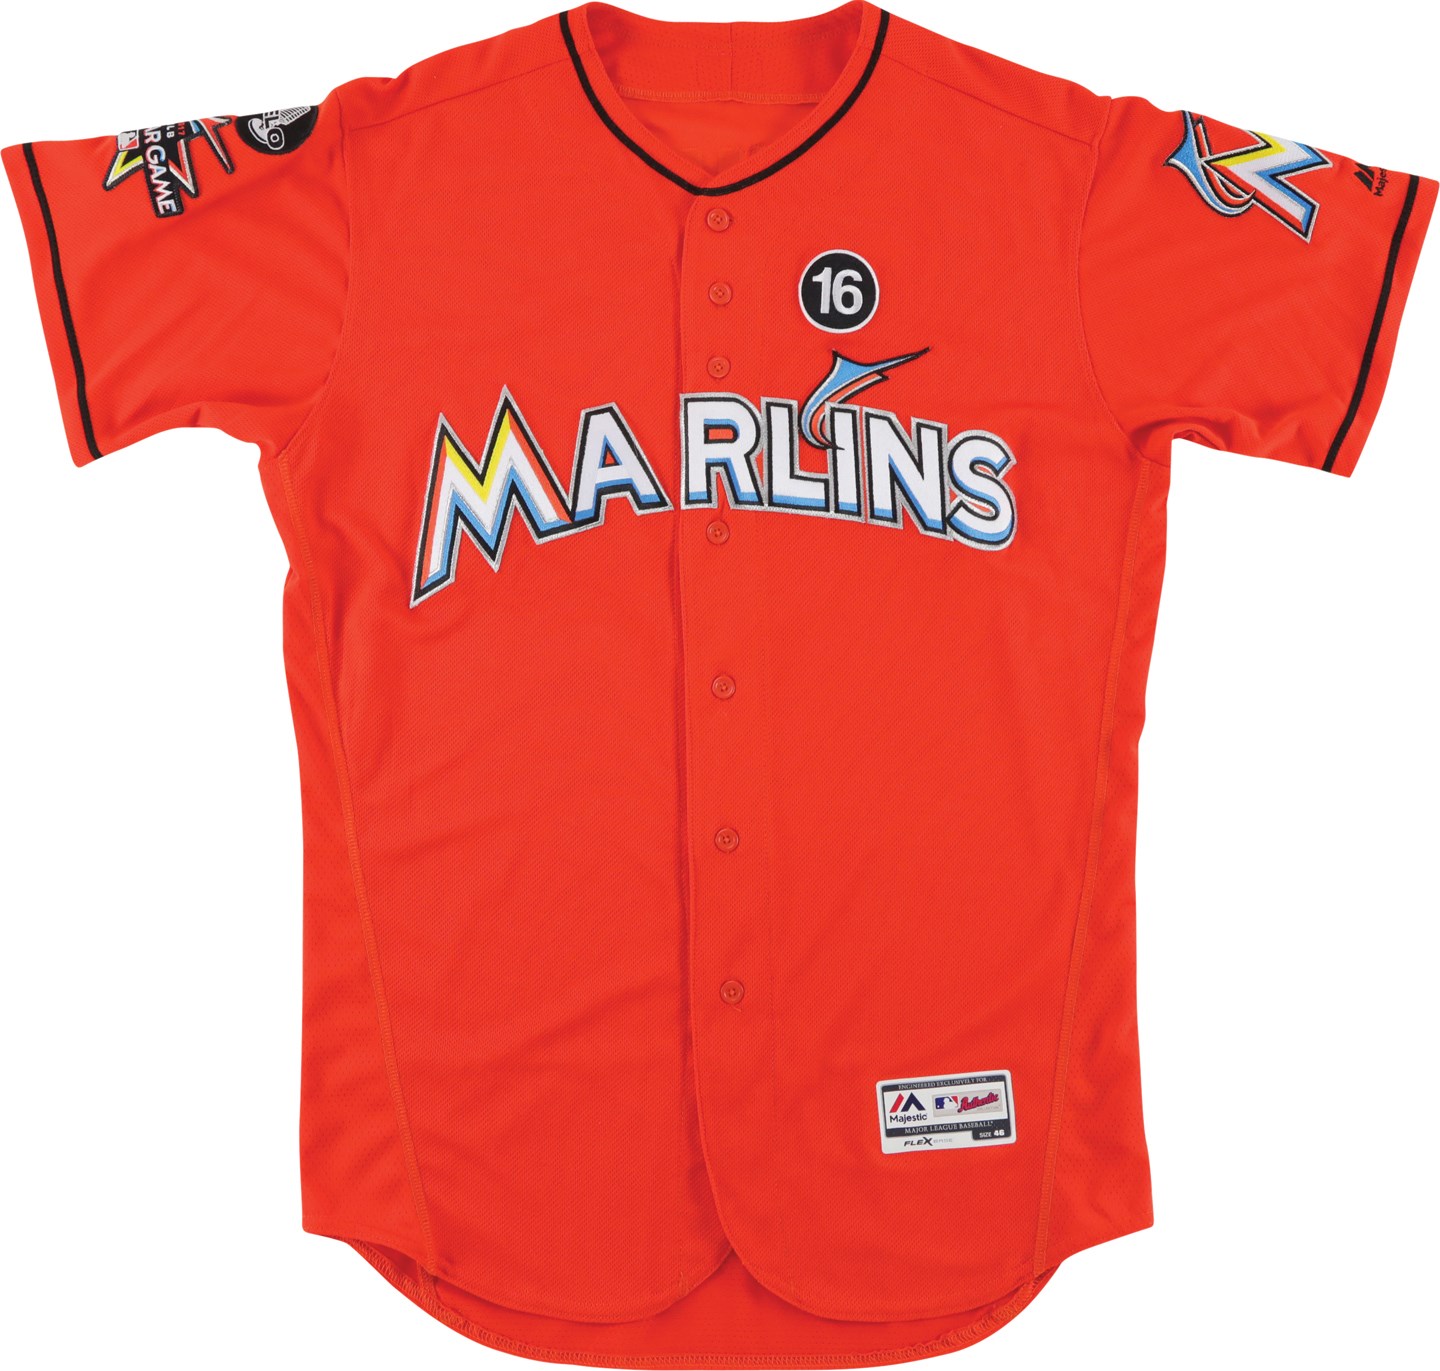 Baseball Equipment - 2017 Don Mattingly Miami Marlins Signed Game Worn Jersey (MEARS A10)